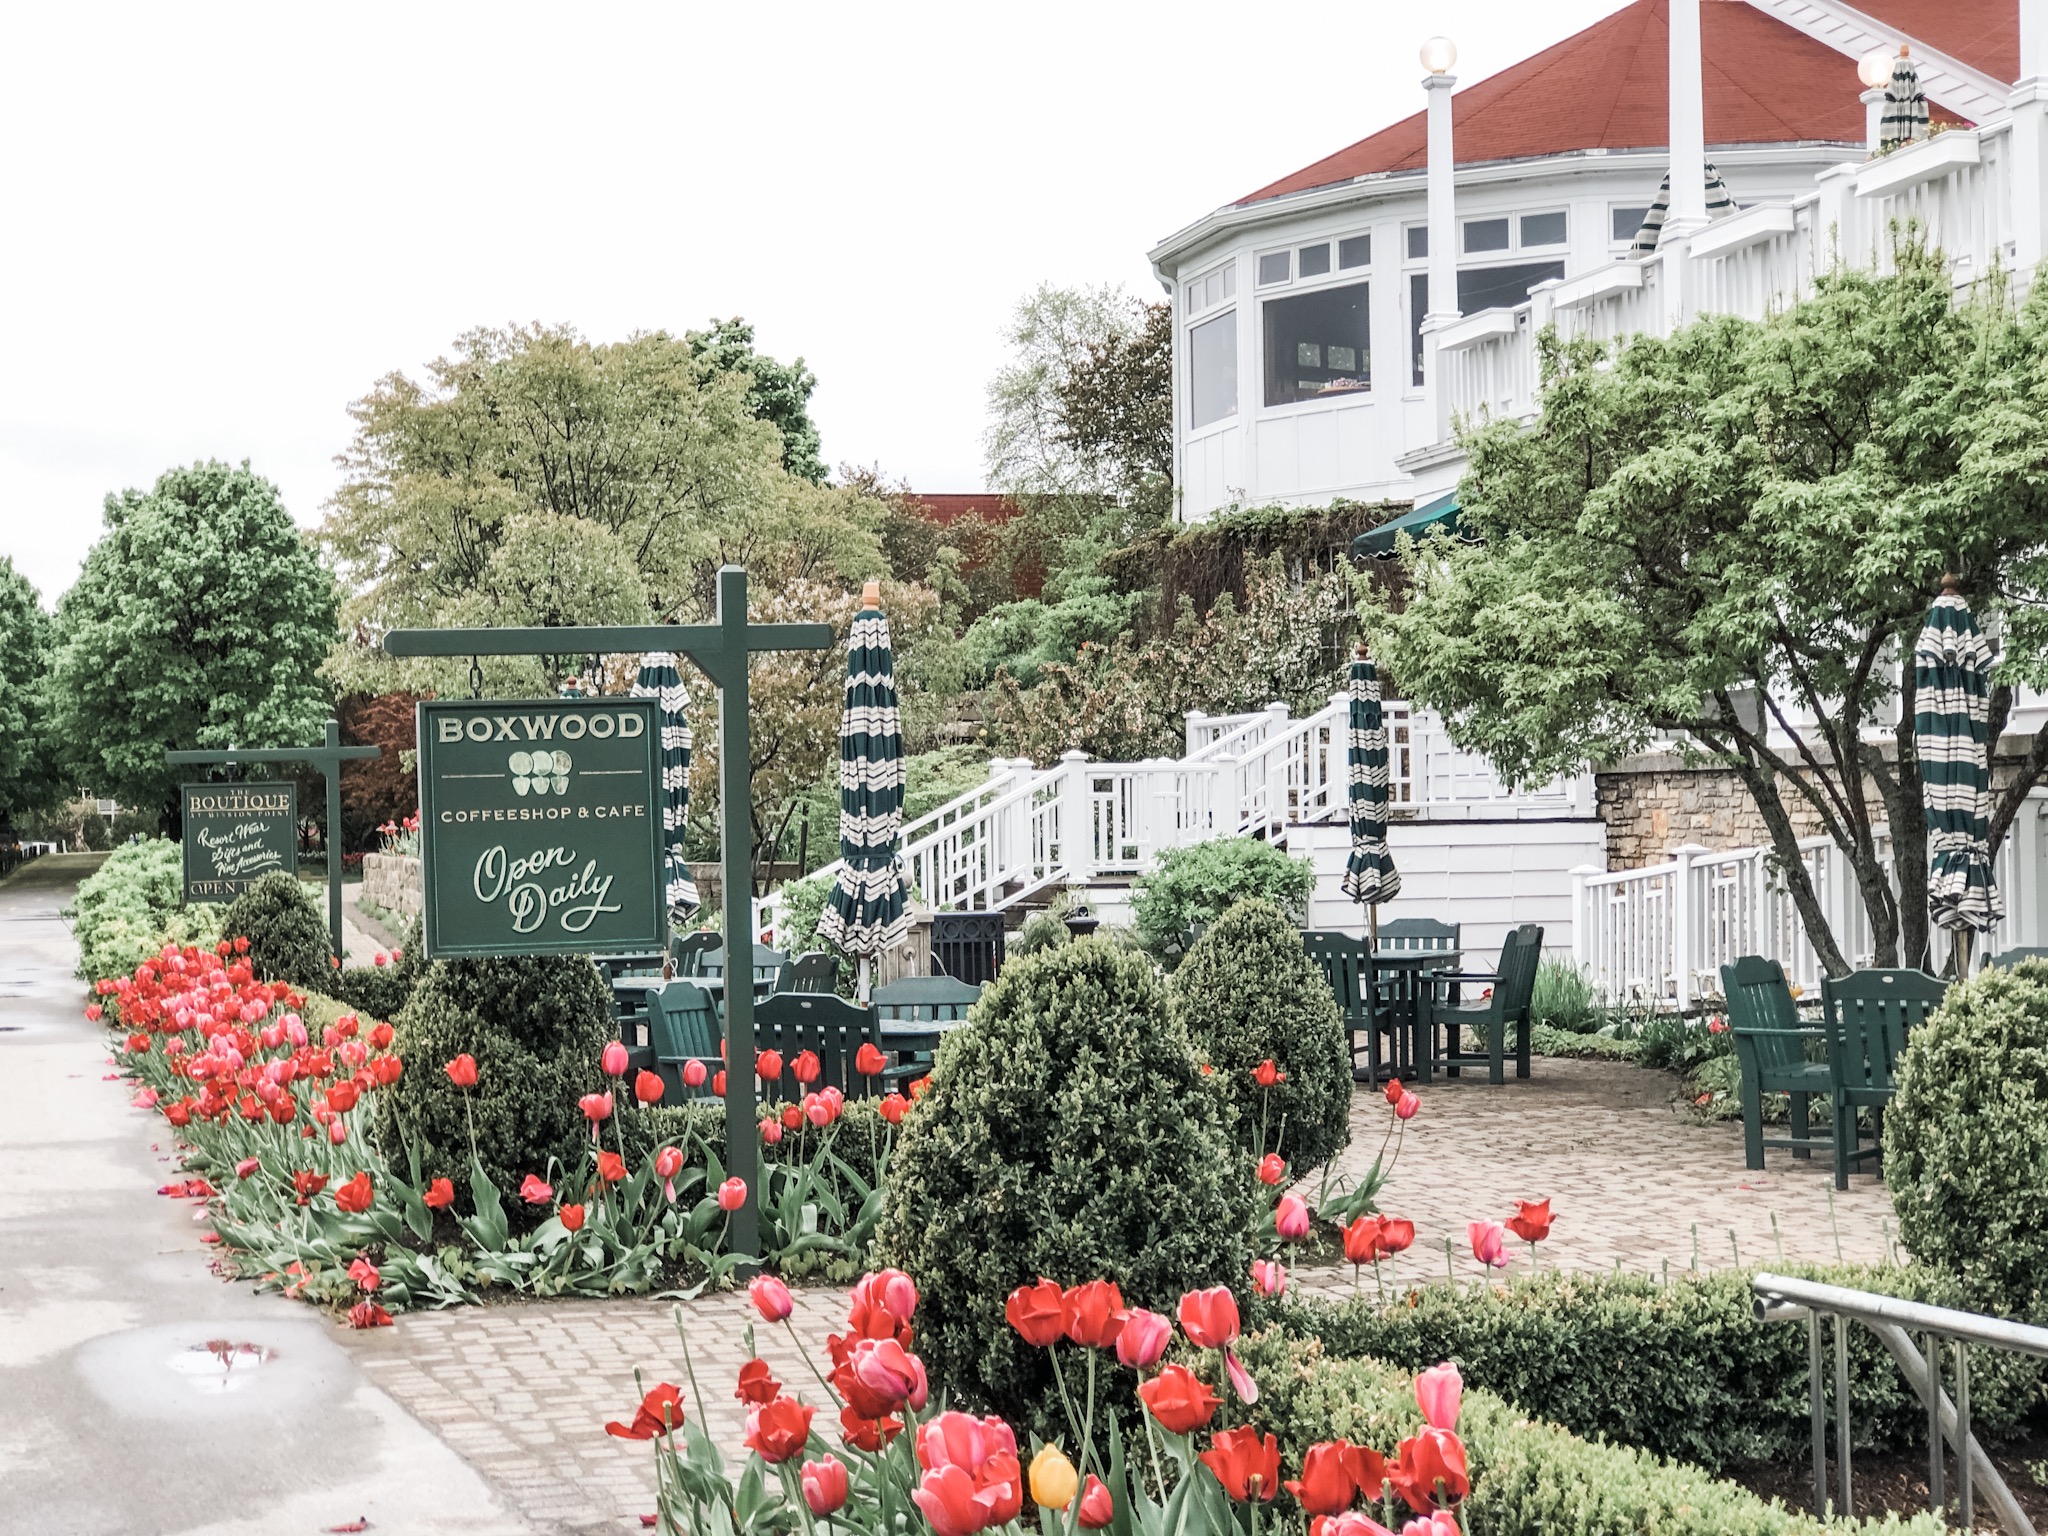 Where to stay and what to see on Mackinac Island. An honest review of Mission Point Resort on Mackinac Island, Michigan.